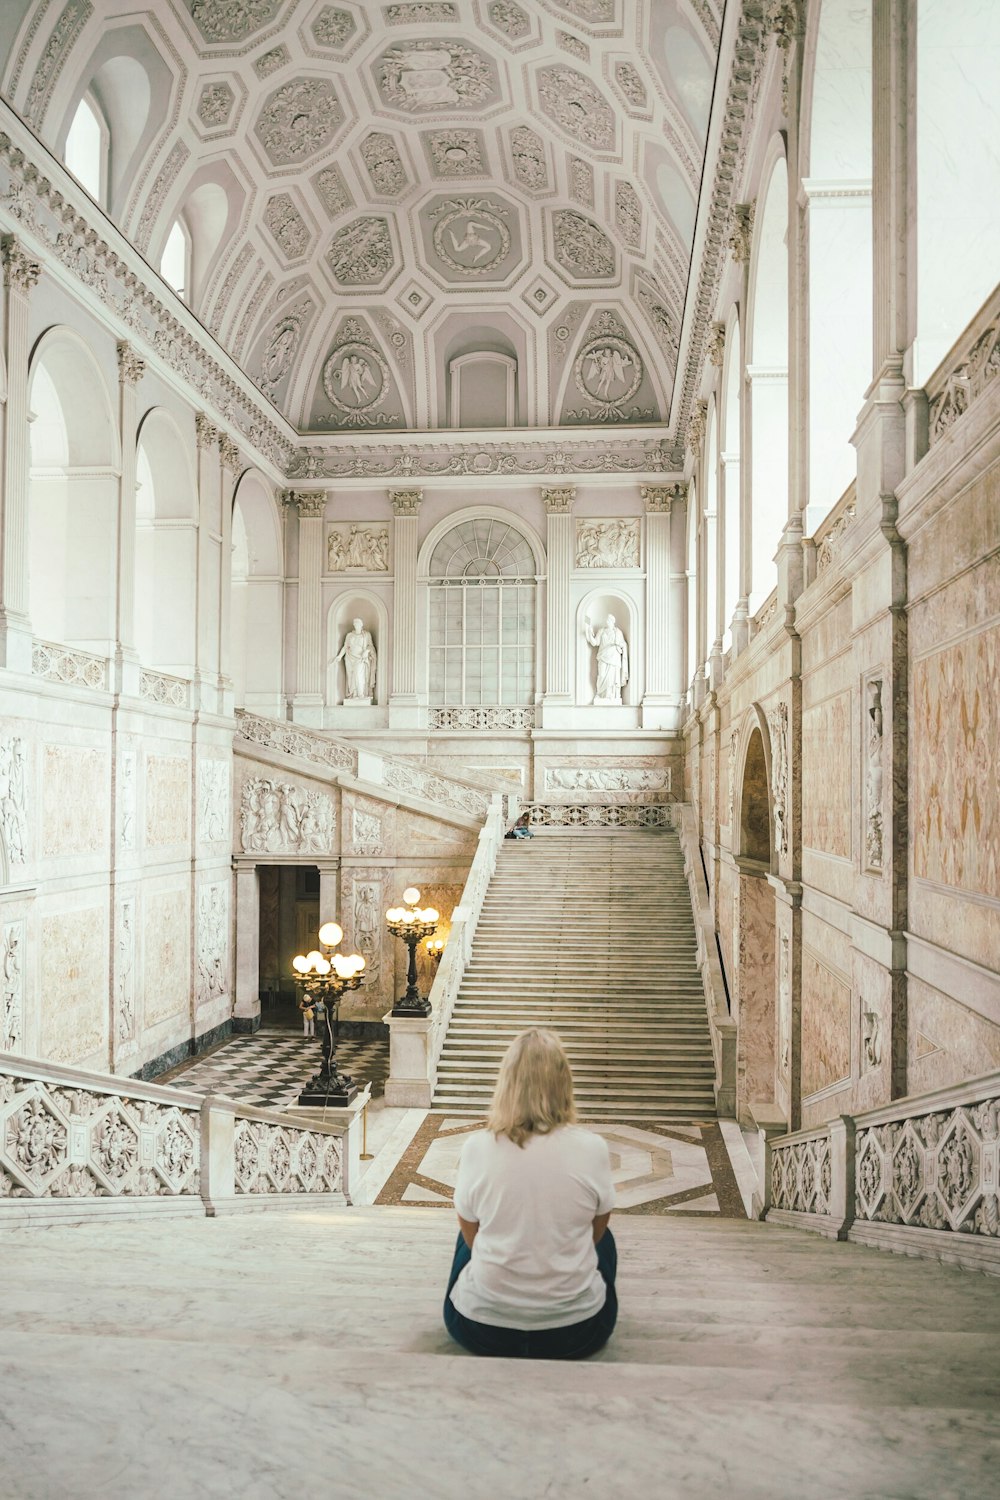 a person sitting on the floor of a large ornate building